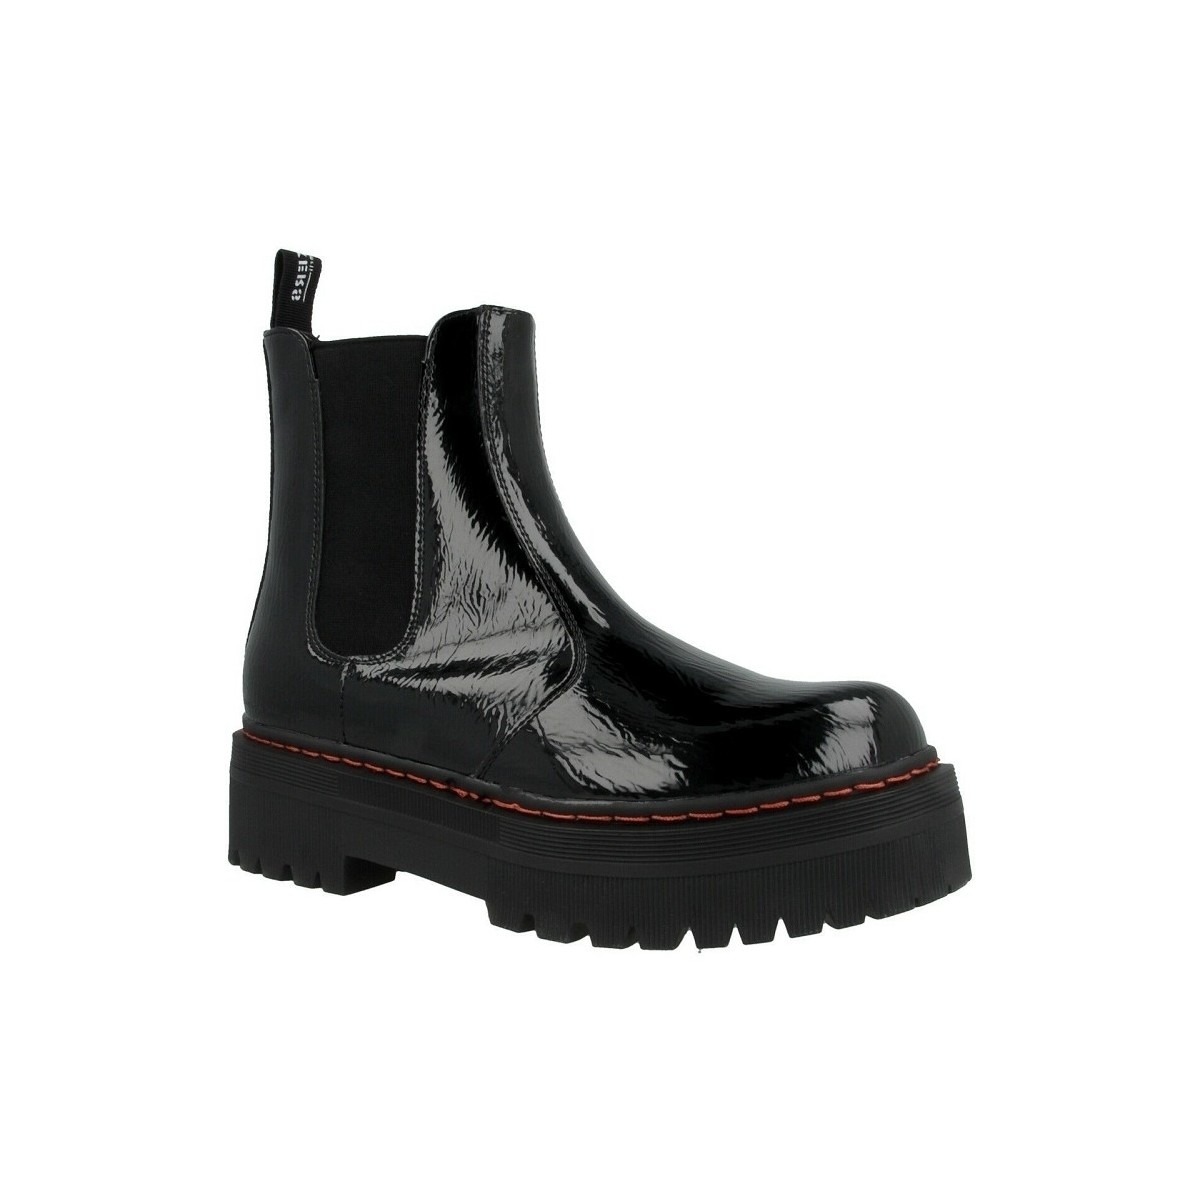 Dockers - Ankle Boots Black for Women from Spartoo GOOFASH